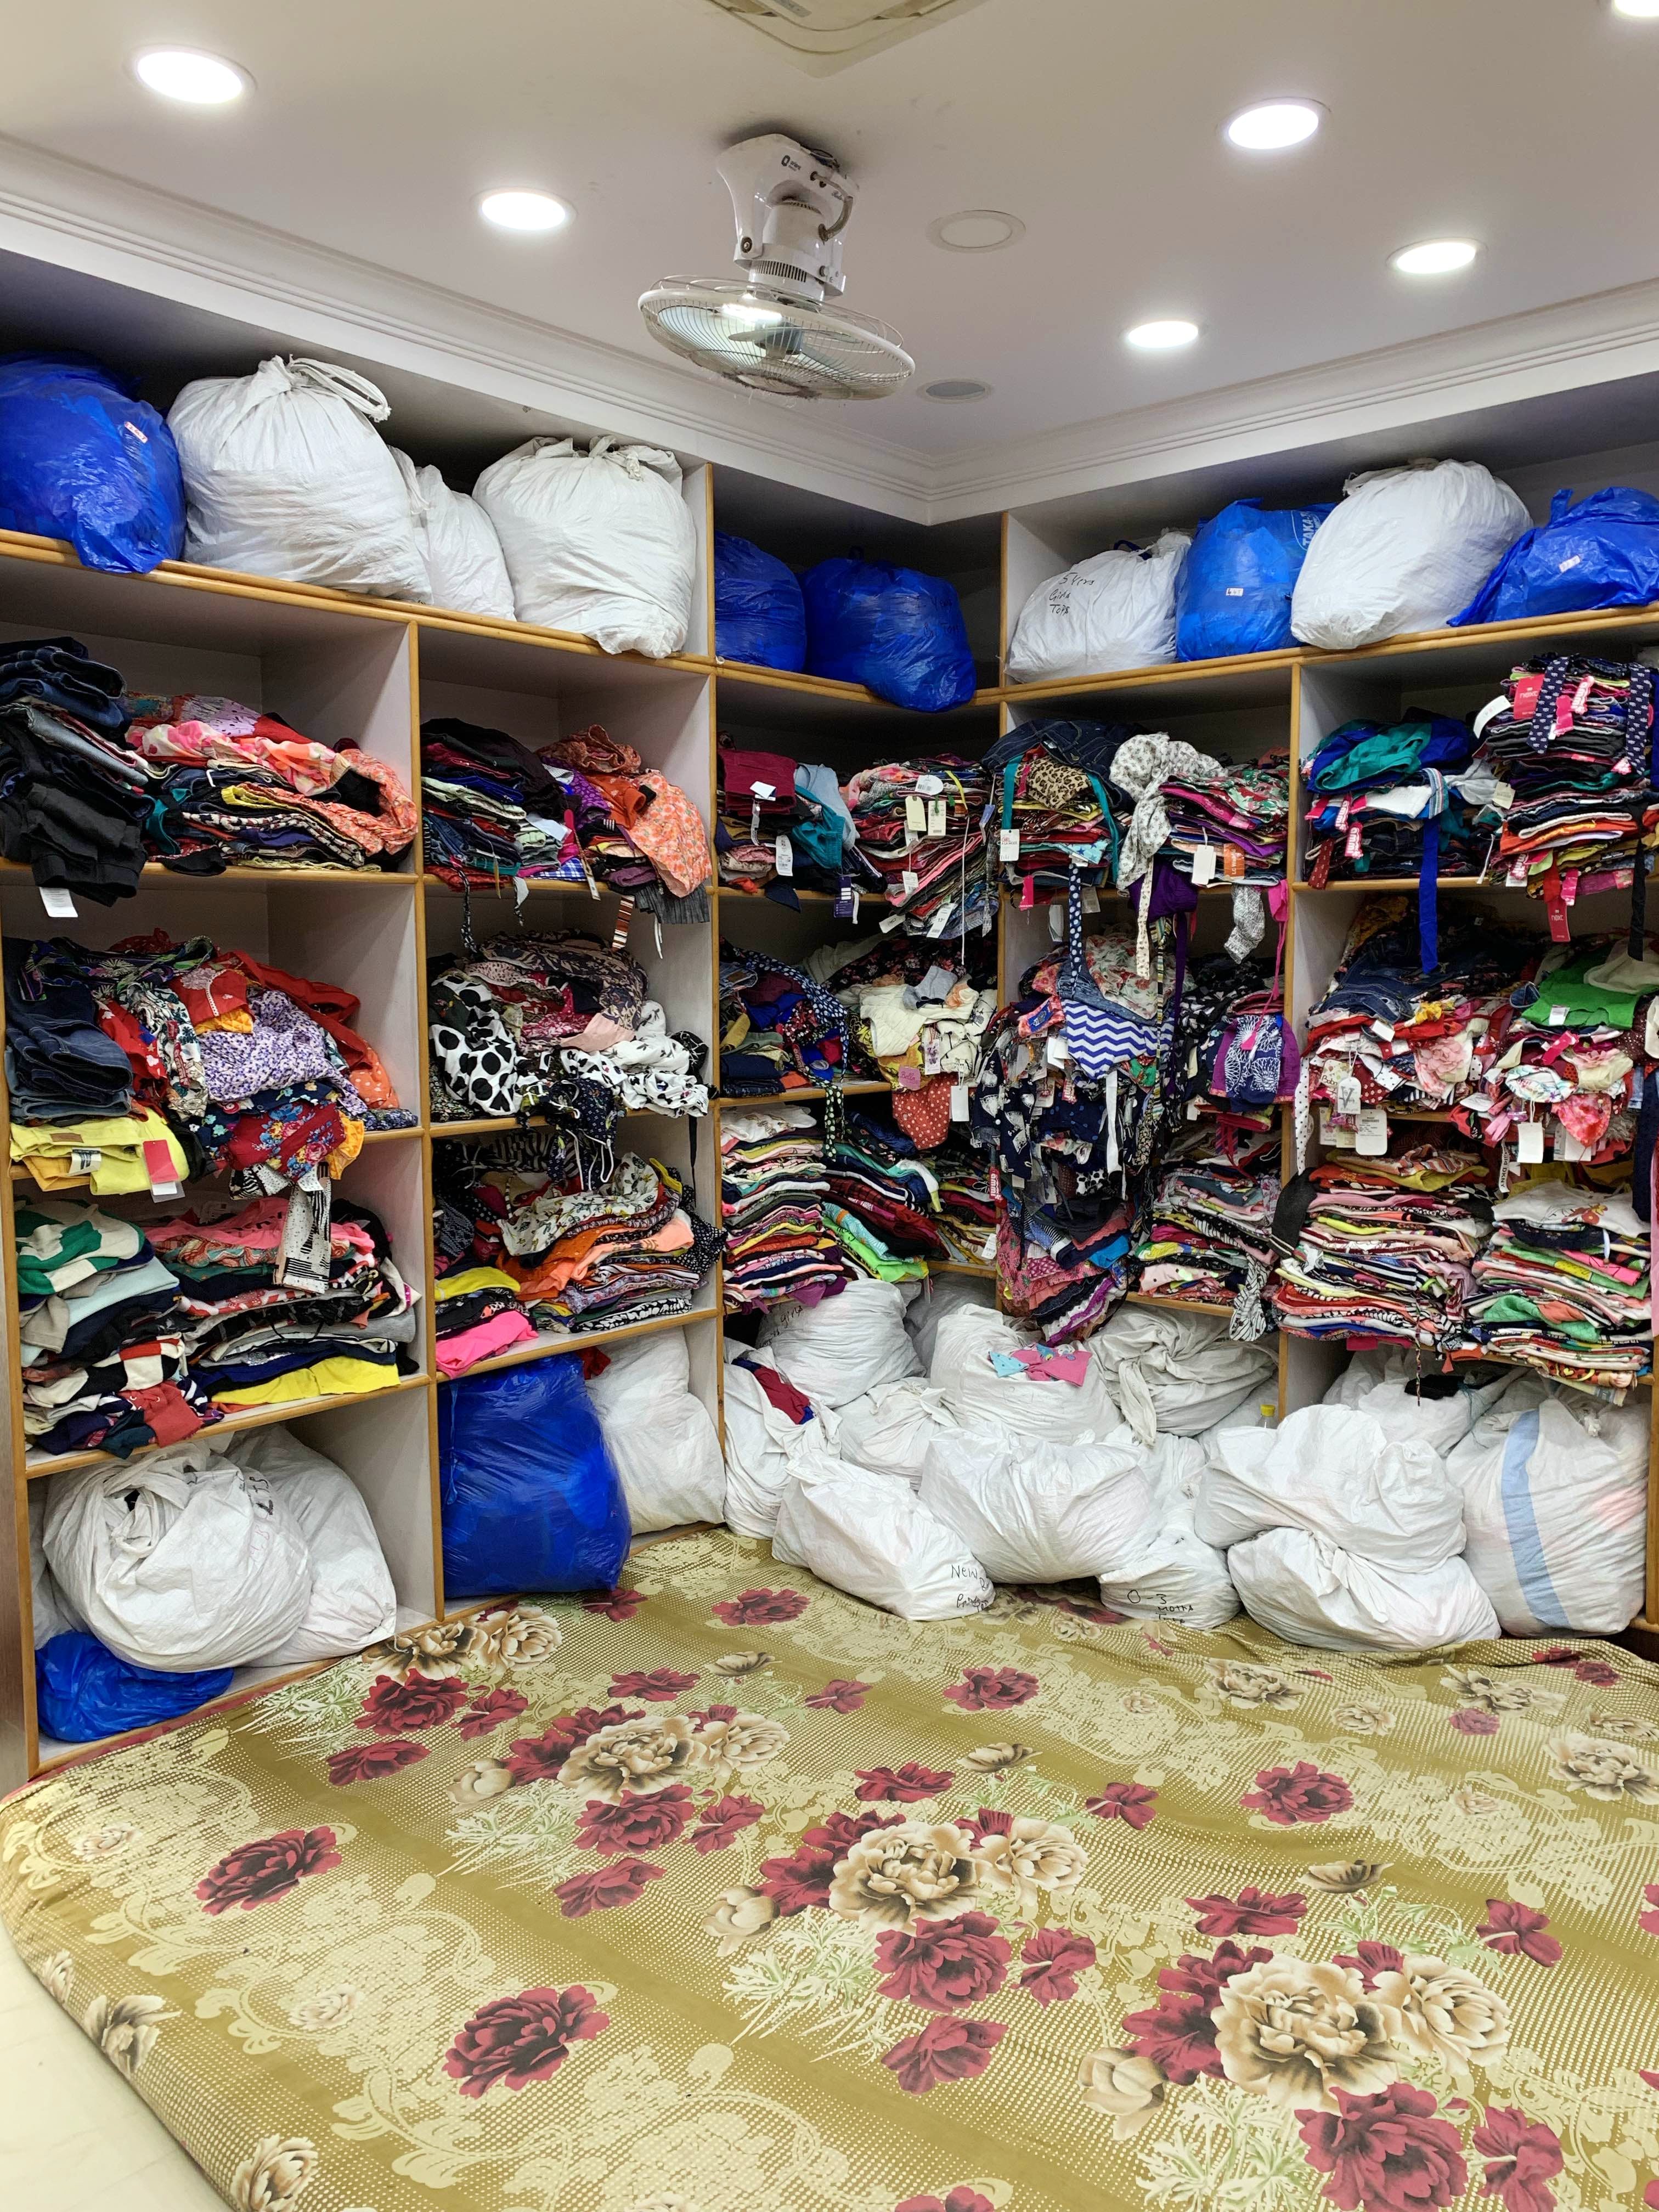 Room,Textile,Footwear,Bazaar,Boutique,Selling,Collection,Building,Outlet store,Market